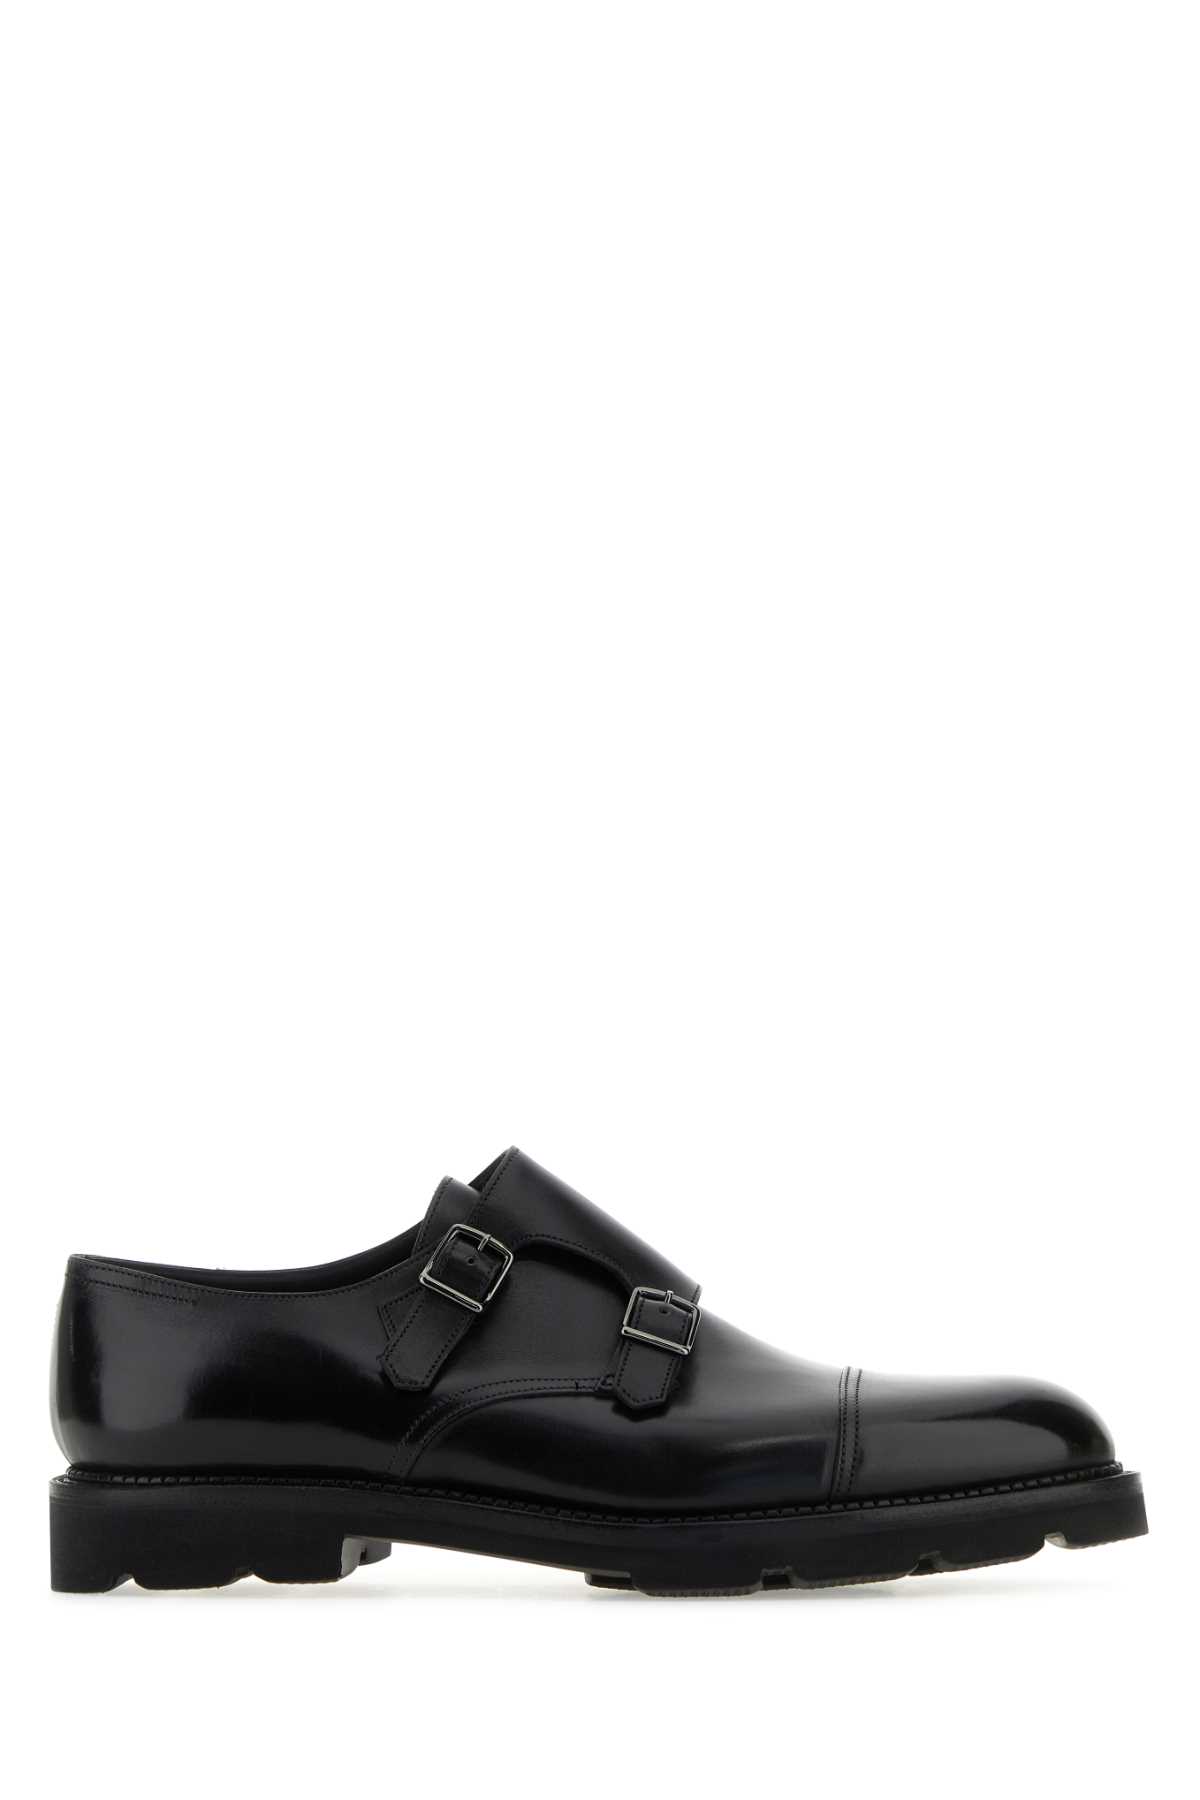 Black Leather Strap Shoes